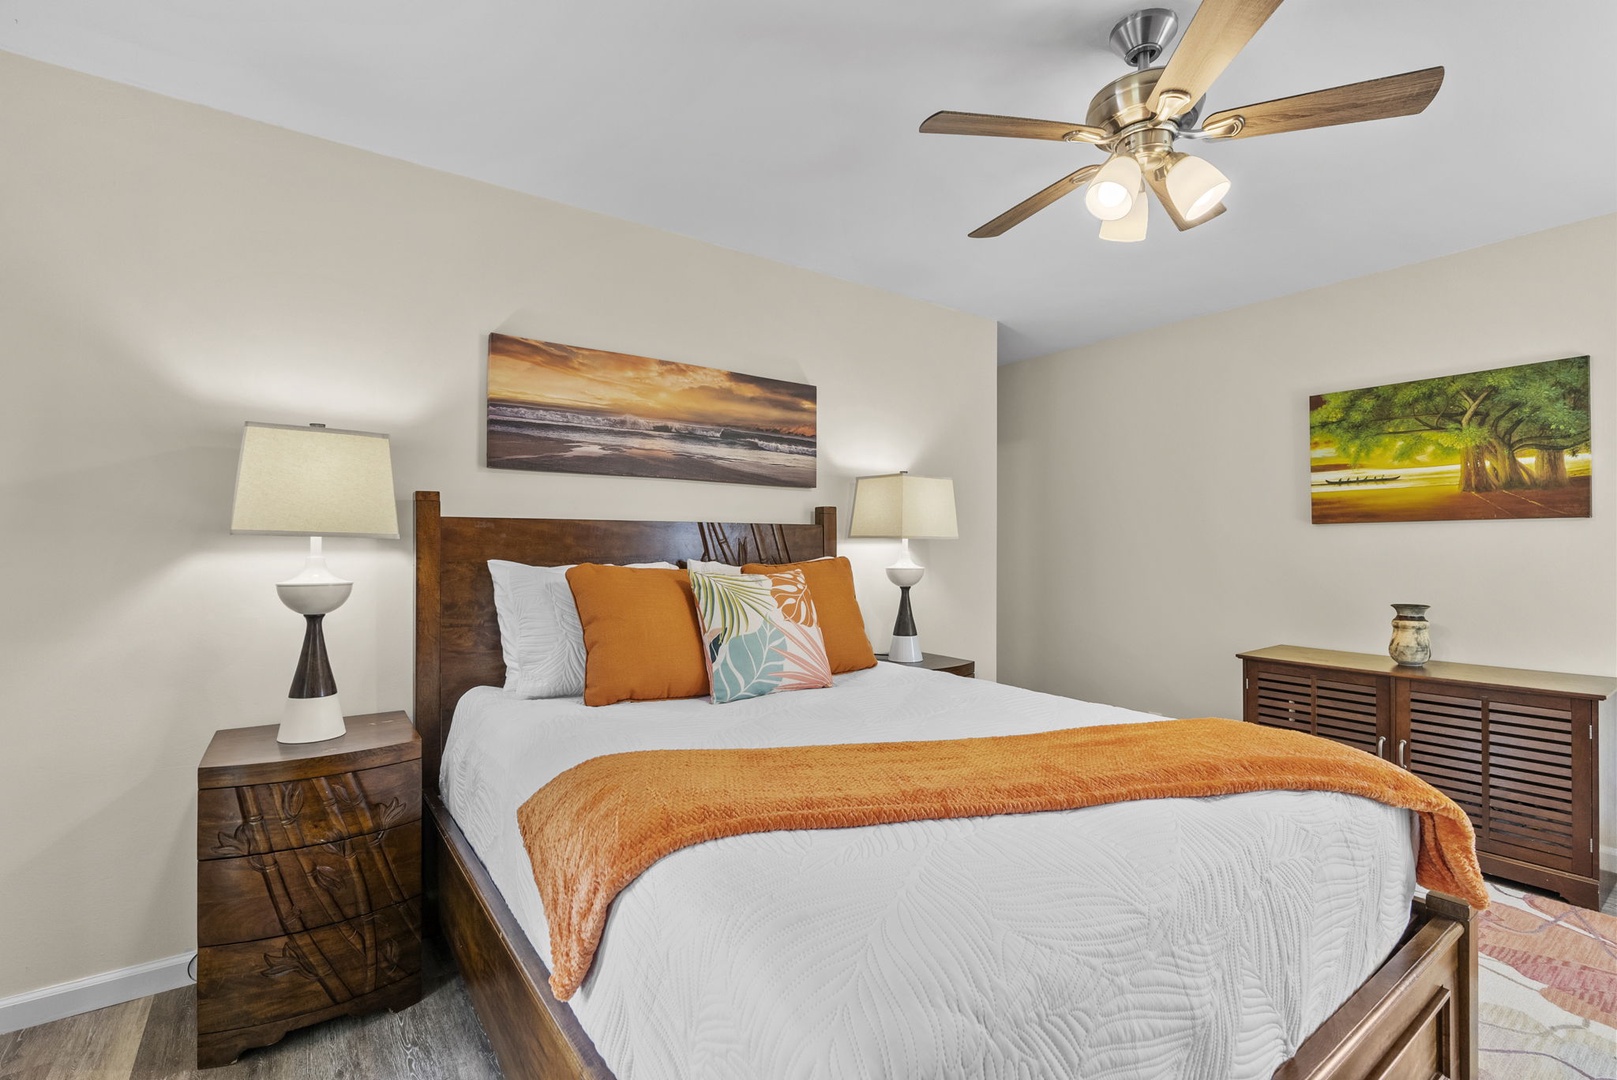 Kailua Vacation Rentals, Hale Aloha - The primary suite offers a sanctuary of comfort, complete with a lavish ensuite, ensuring restful nights and serene mornings